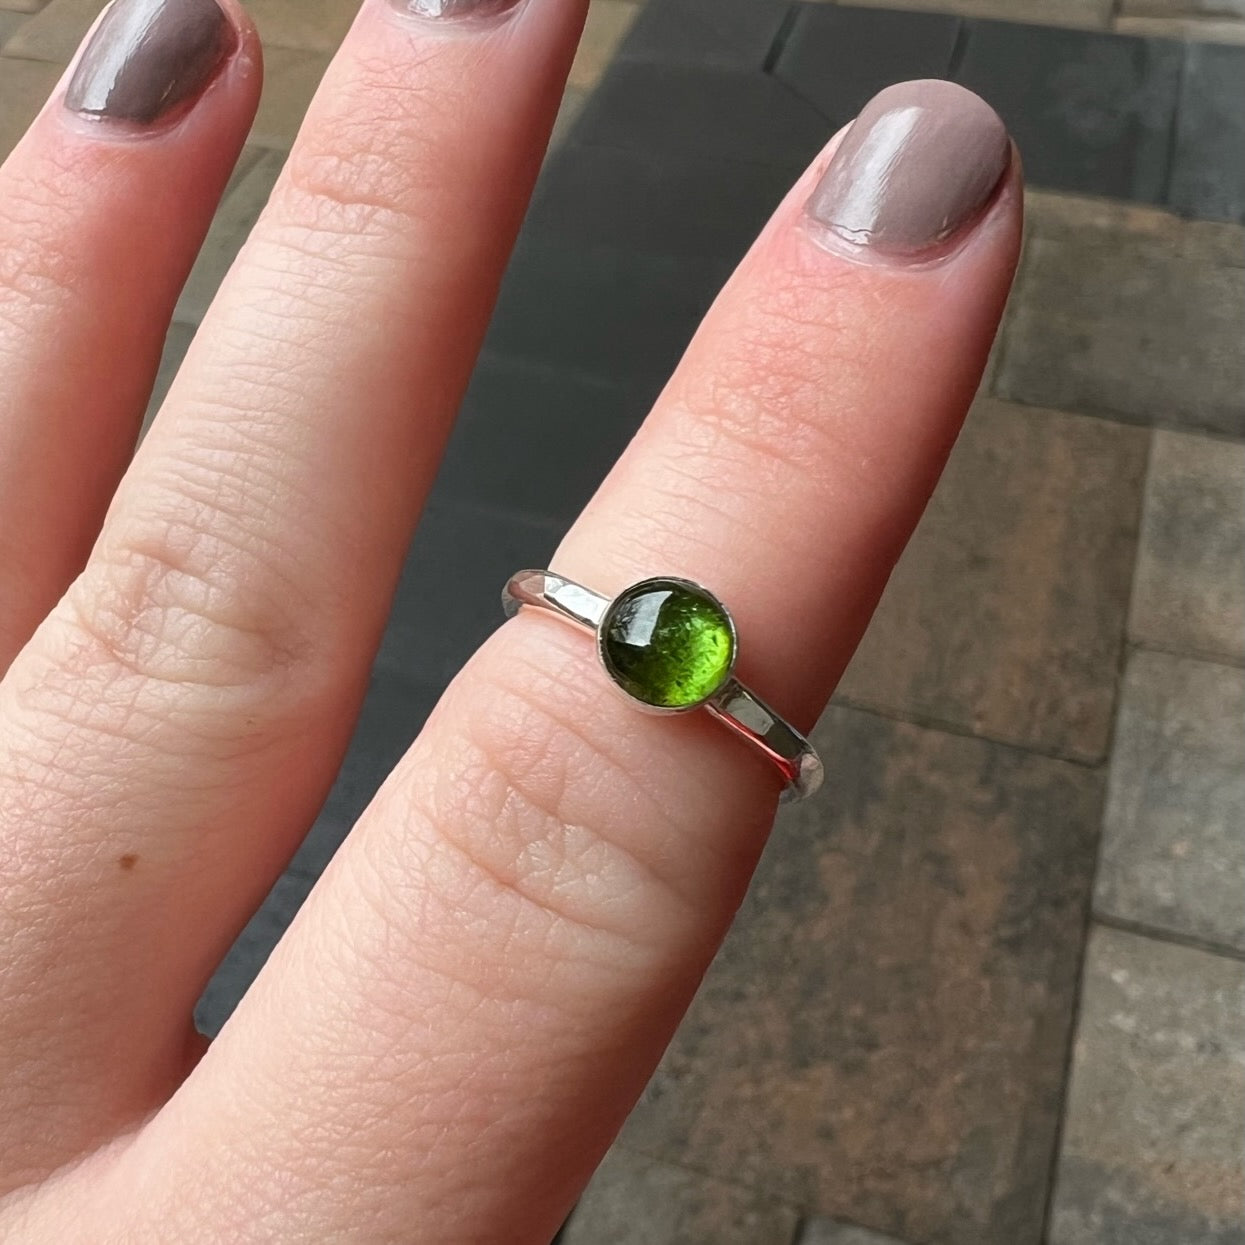 A Round 6mm green tourmaline gemstone set in a sterling silver bezel setting on a sturdy hammered band modeled on a finger. 